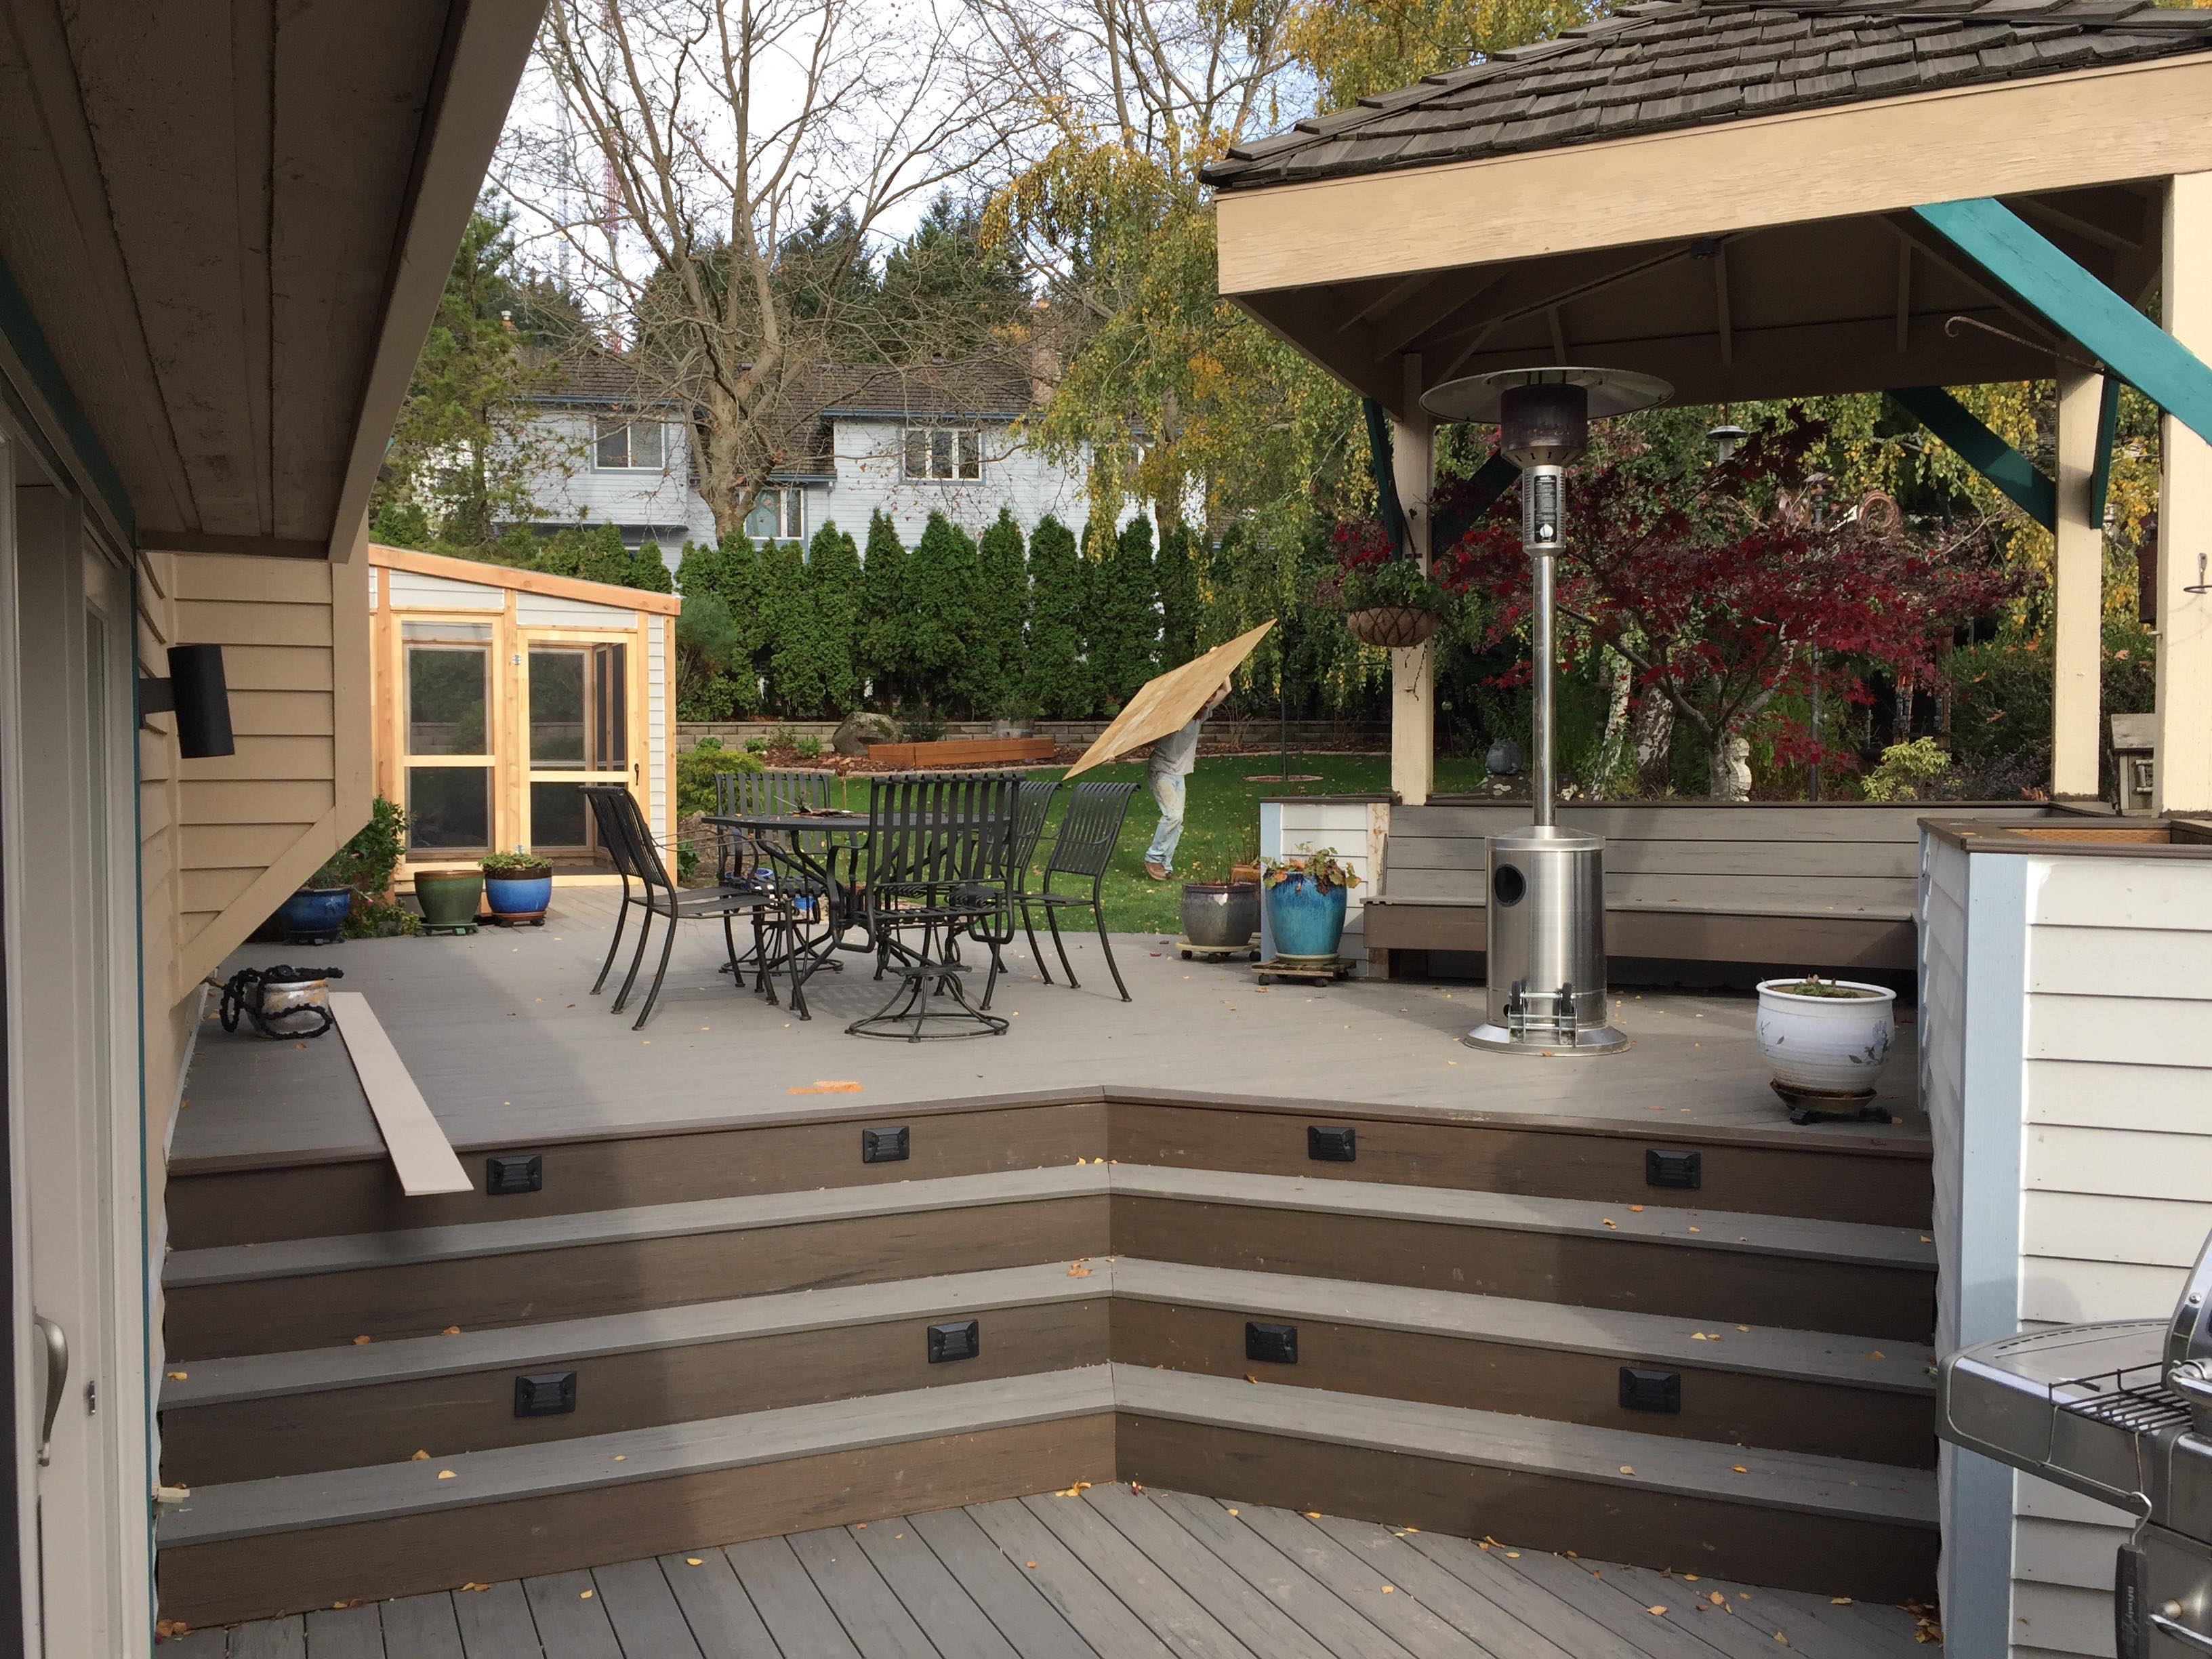 Timbertech steps, decking and border